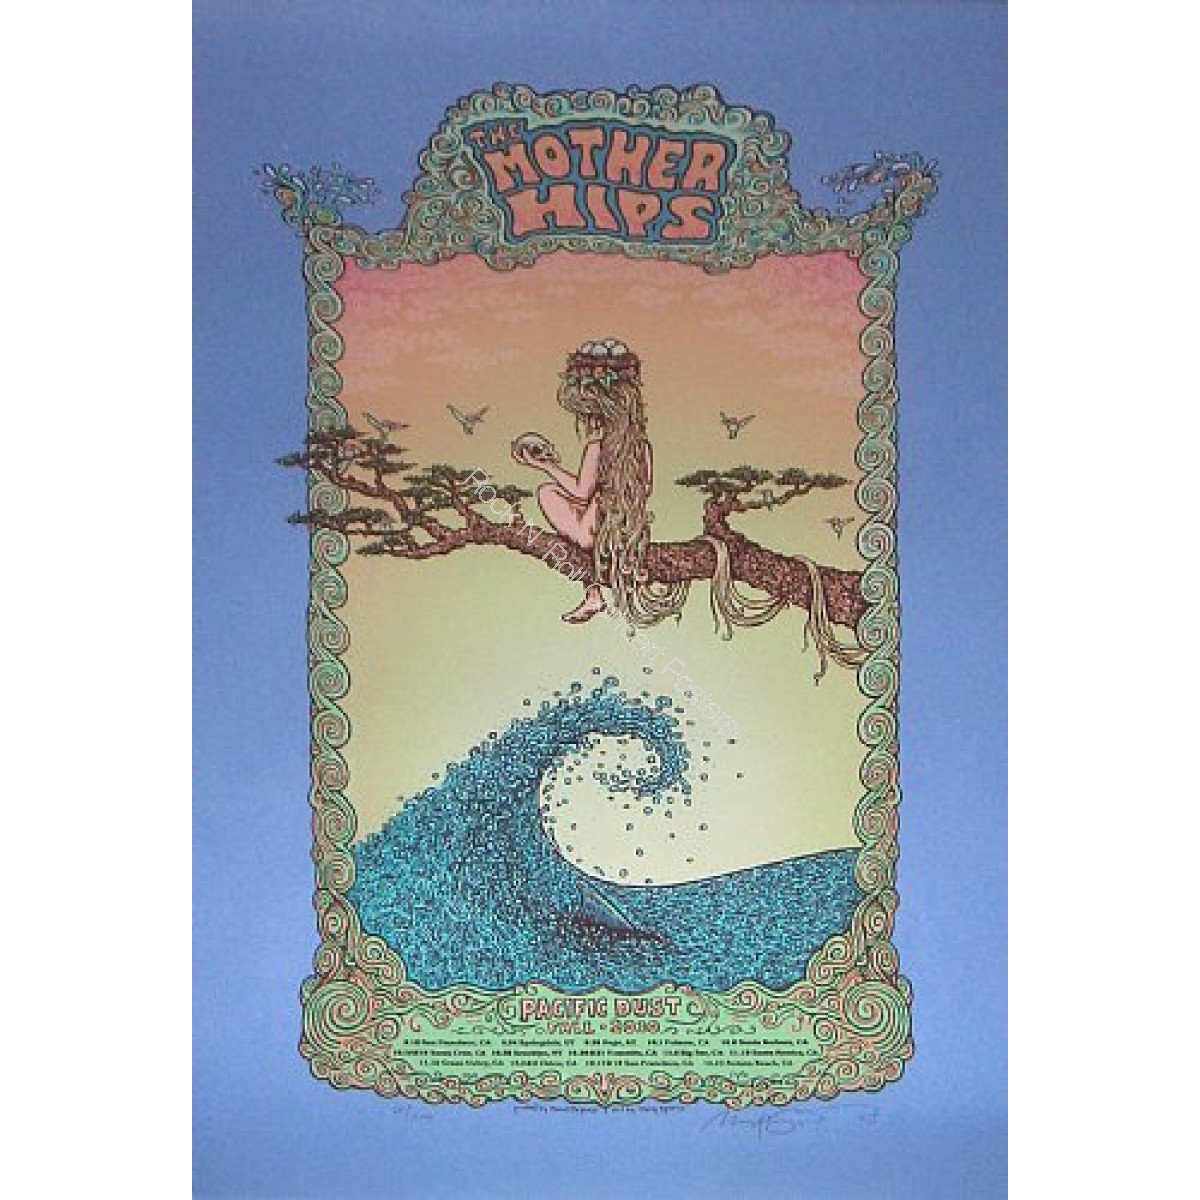 The Mother Hips Pacific Dust Fall Tour 2010 print By Marq Spusta